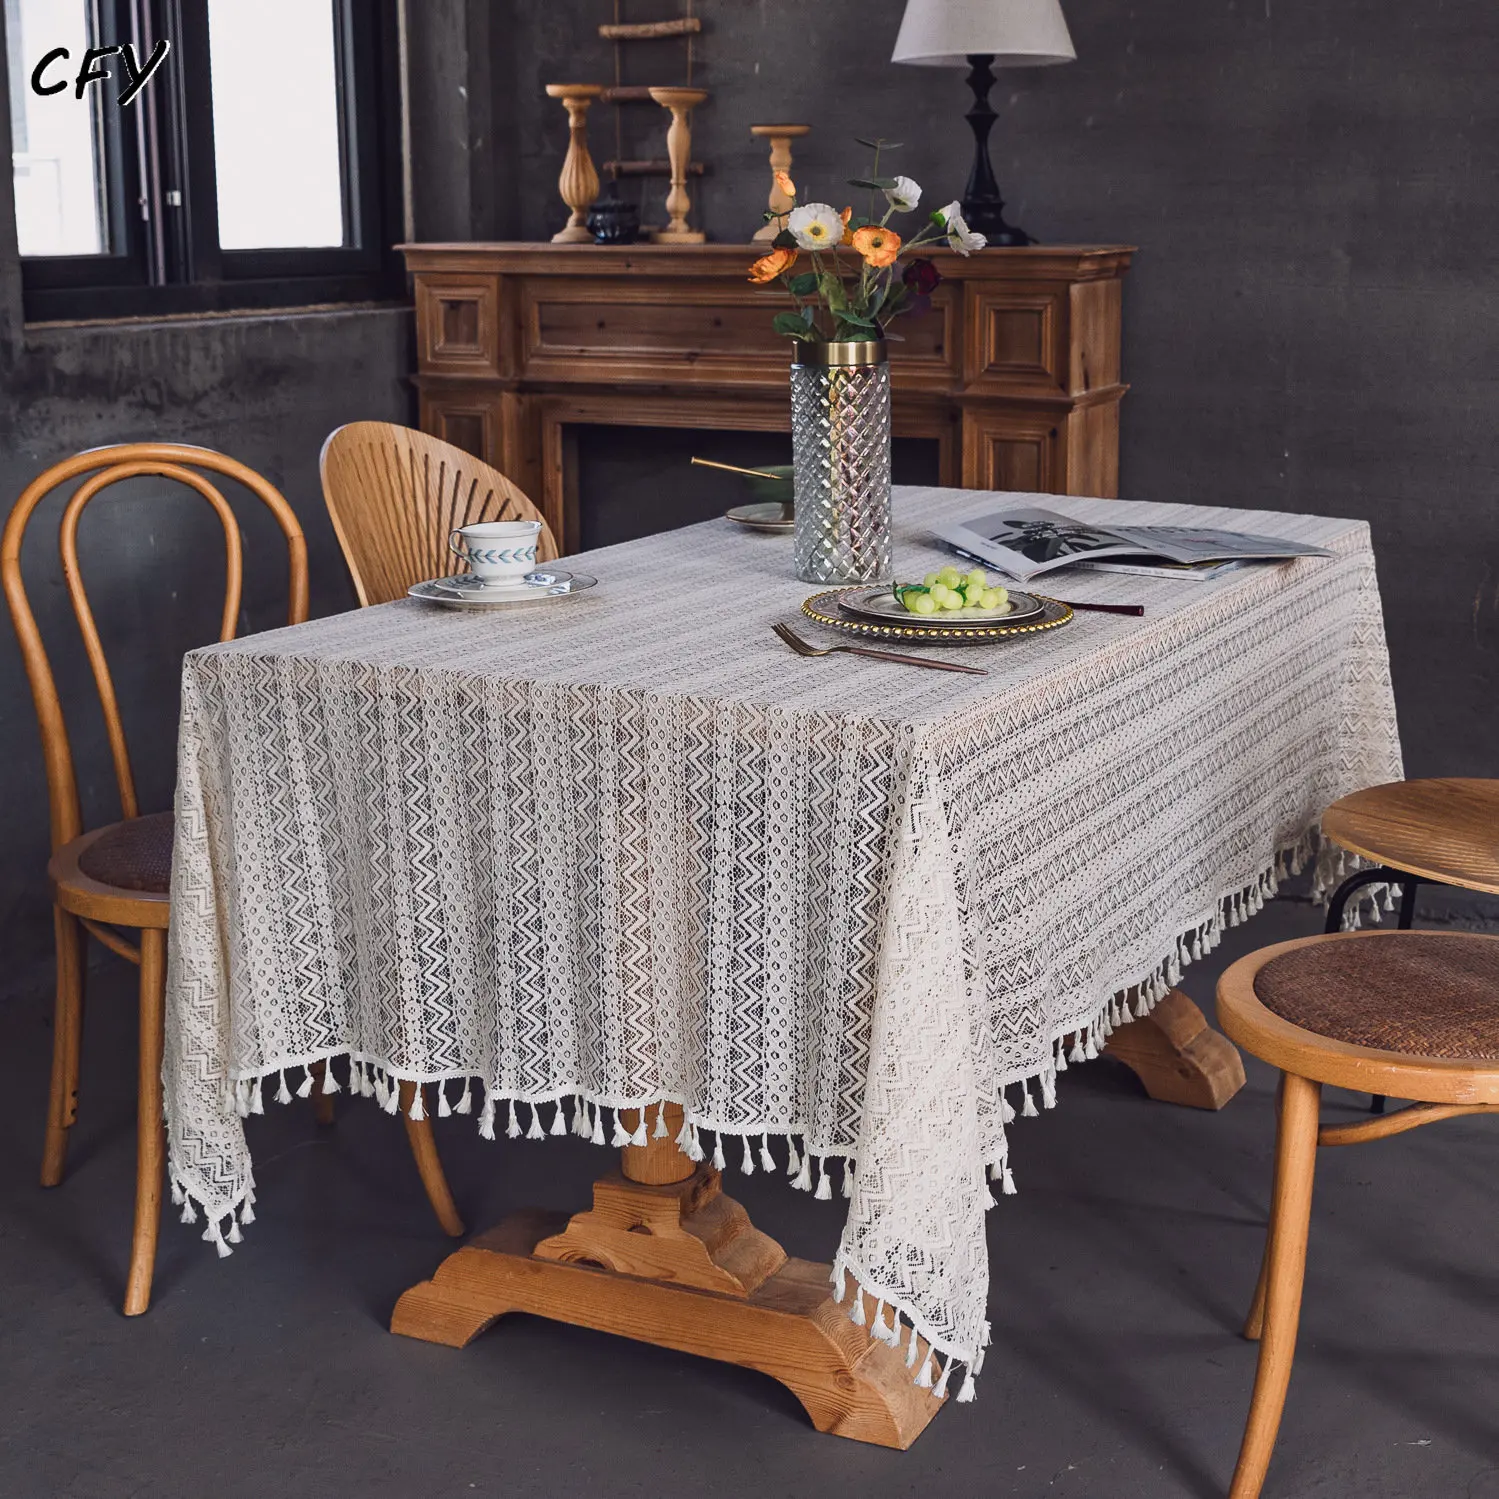 

Cotton Linen American Retro Solid Tablecloth Checkered Knit with Tassels Rectangular Tablecloth Dining Table Cover Tea Cloth